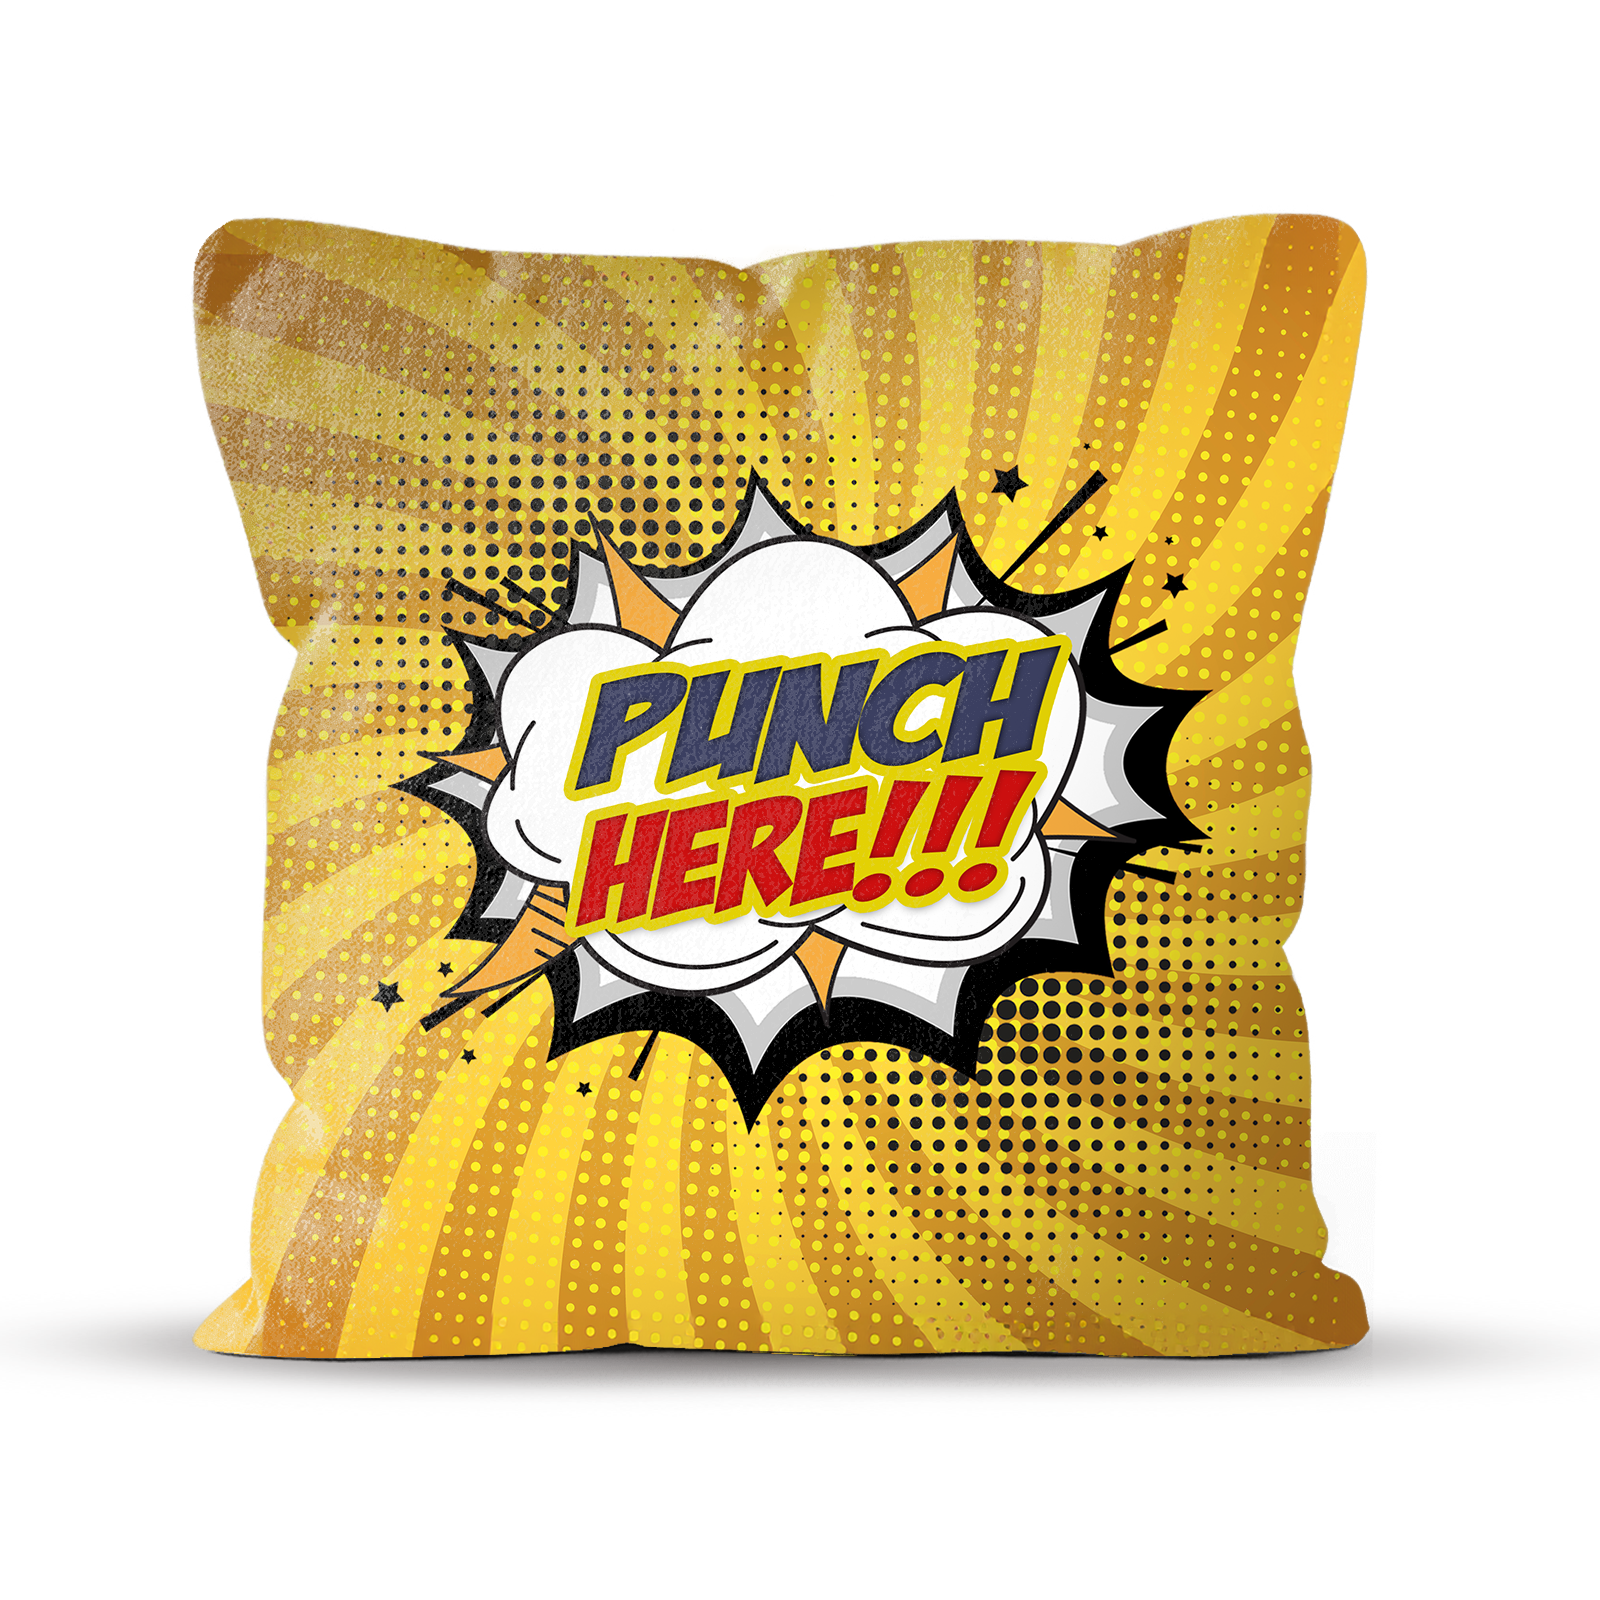 Epic Comic Style Punch Here Pillow